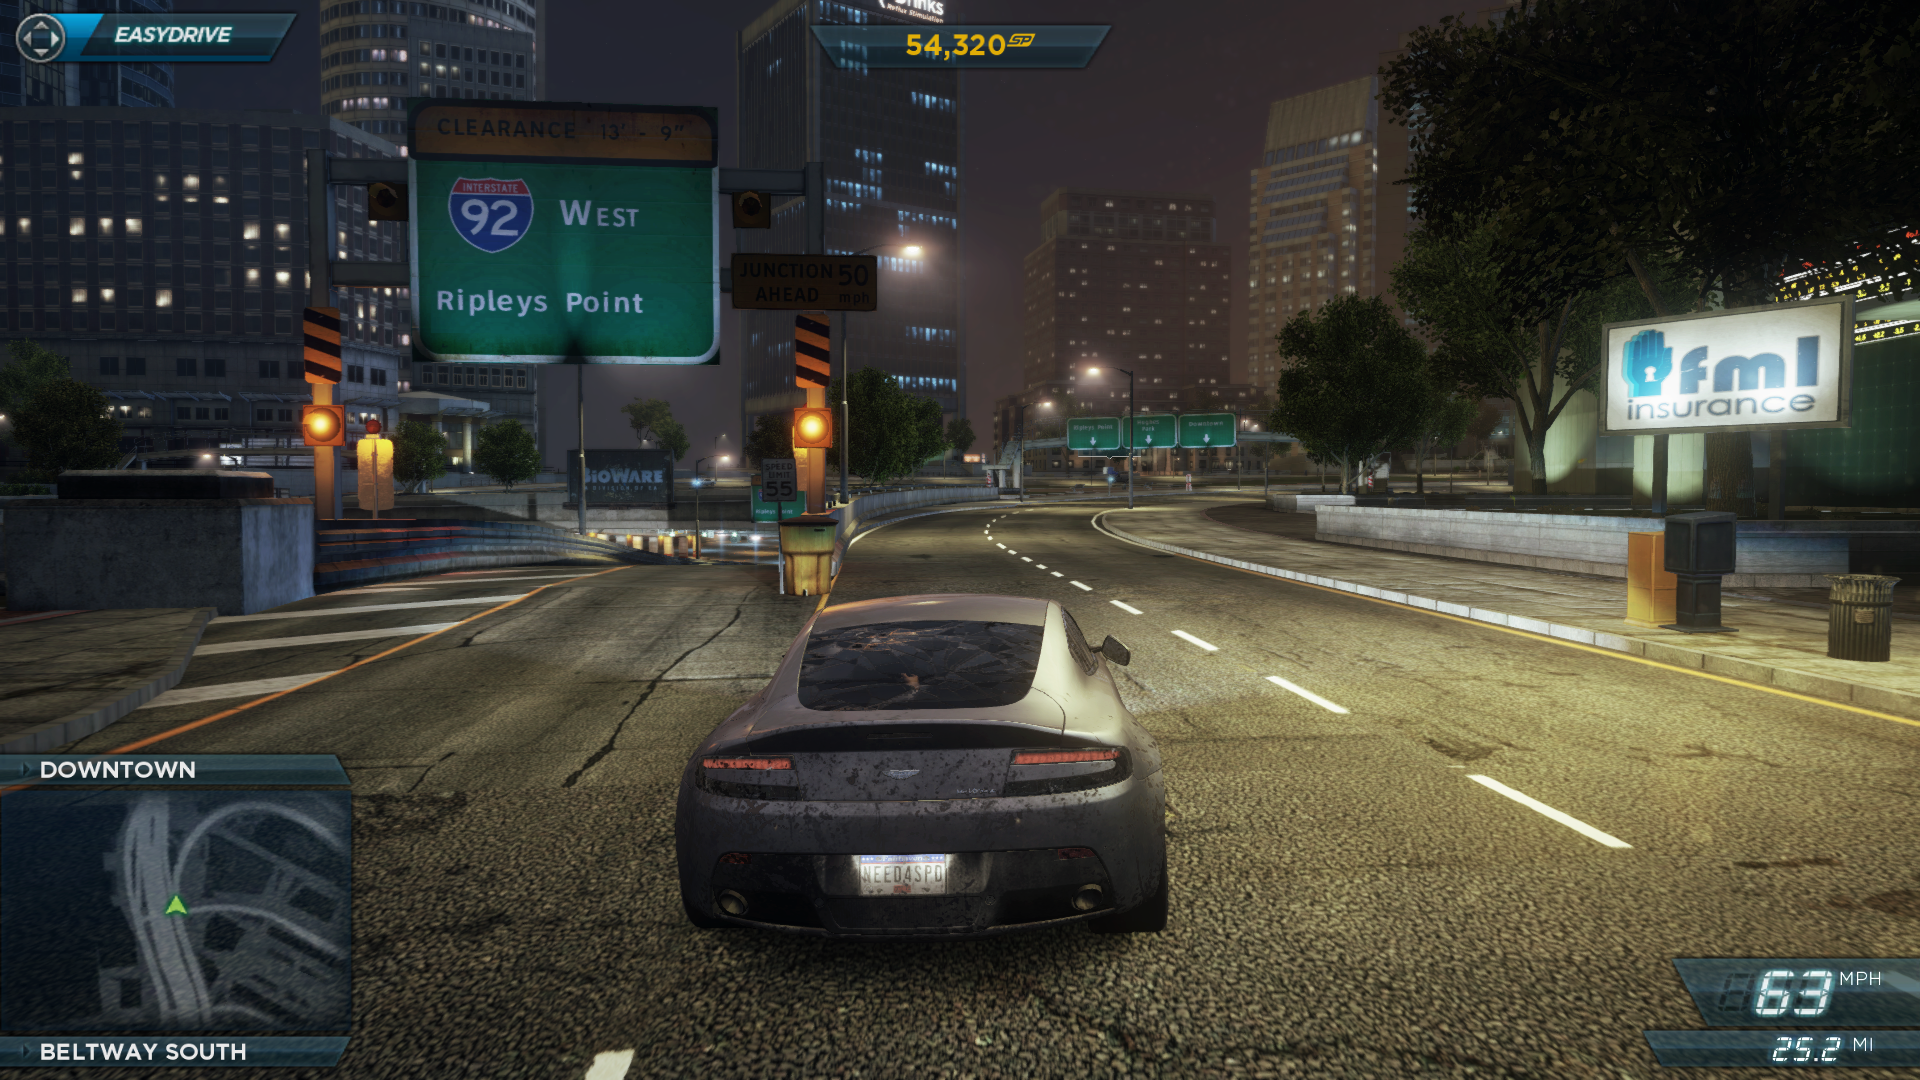 nfs most wanted free download full version for windows 8.1